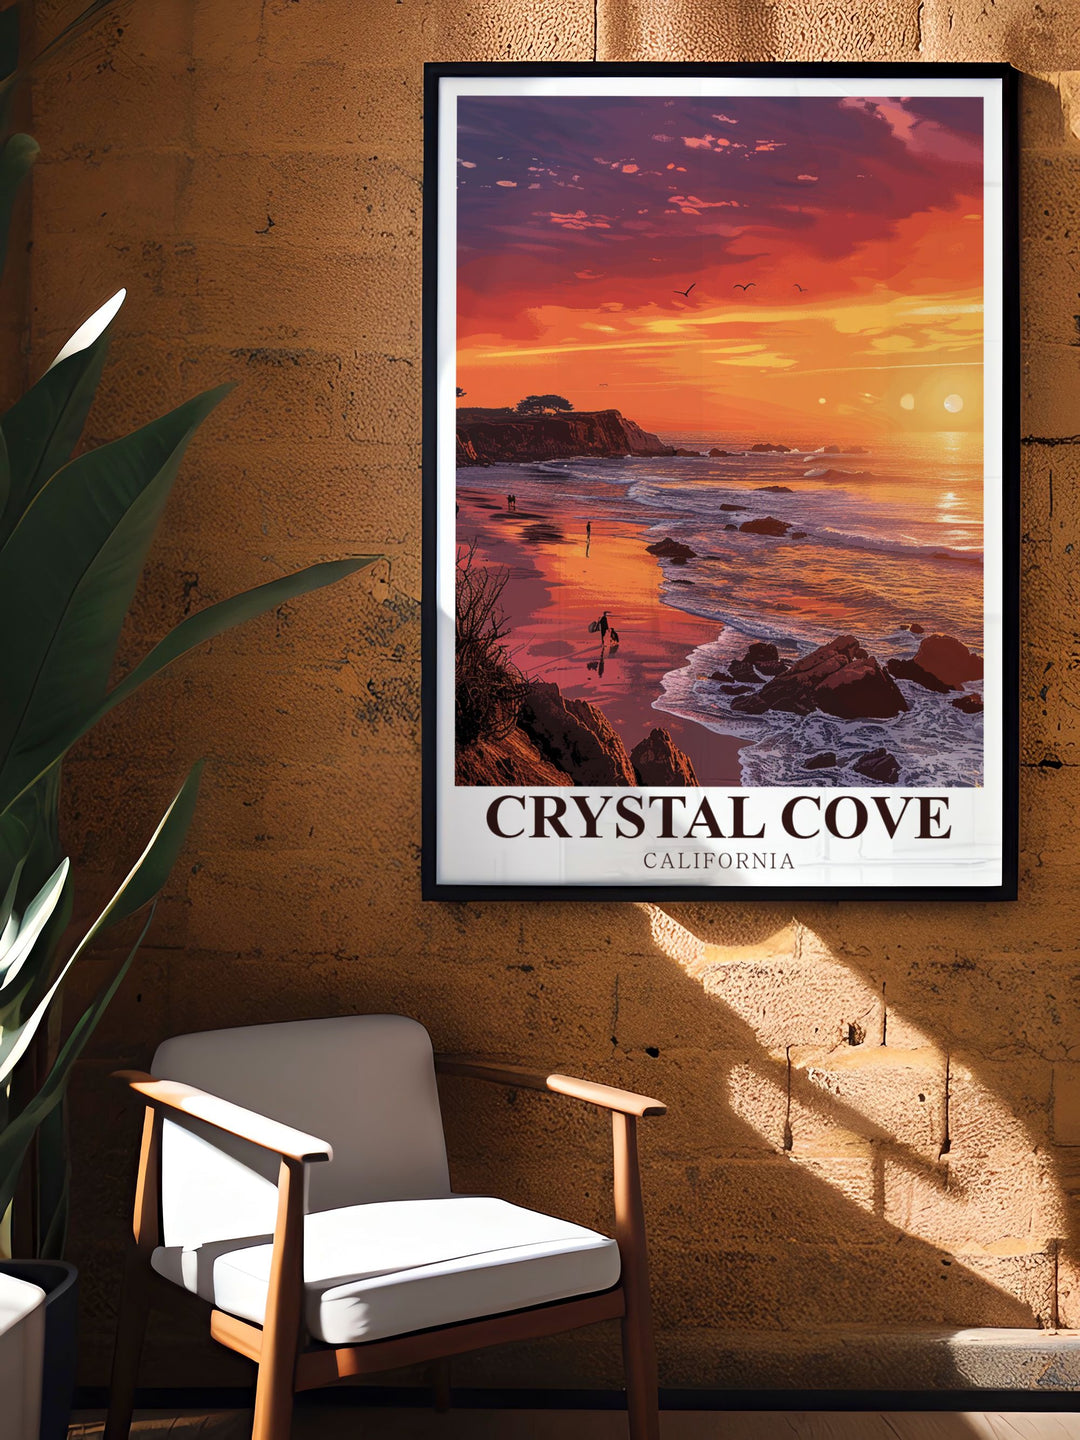 Enhance your California decor with a Crystal Cove Beach vintage print featuring the idyllic scenery and vibrant hues of the sunset along the California coast a beautiful addition to any space that brings the peaceful vibes of Crystal Cove Beach indoors.